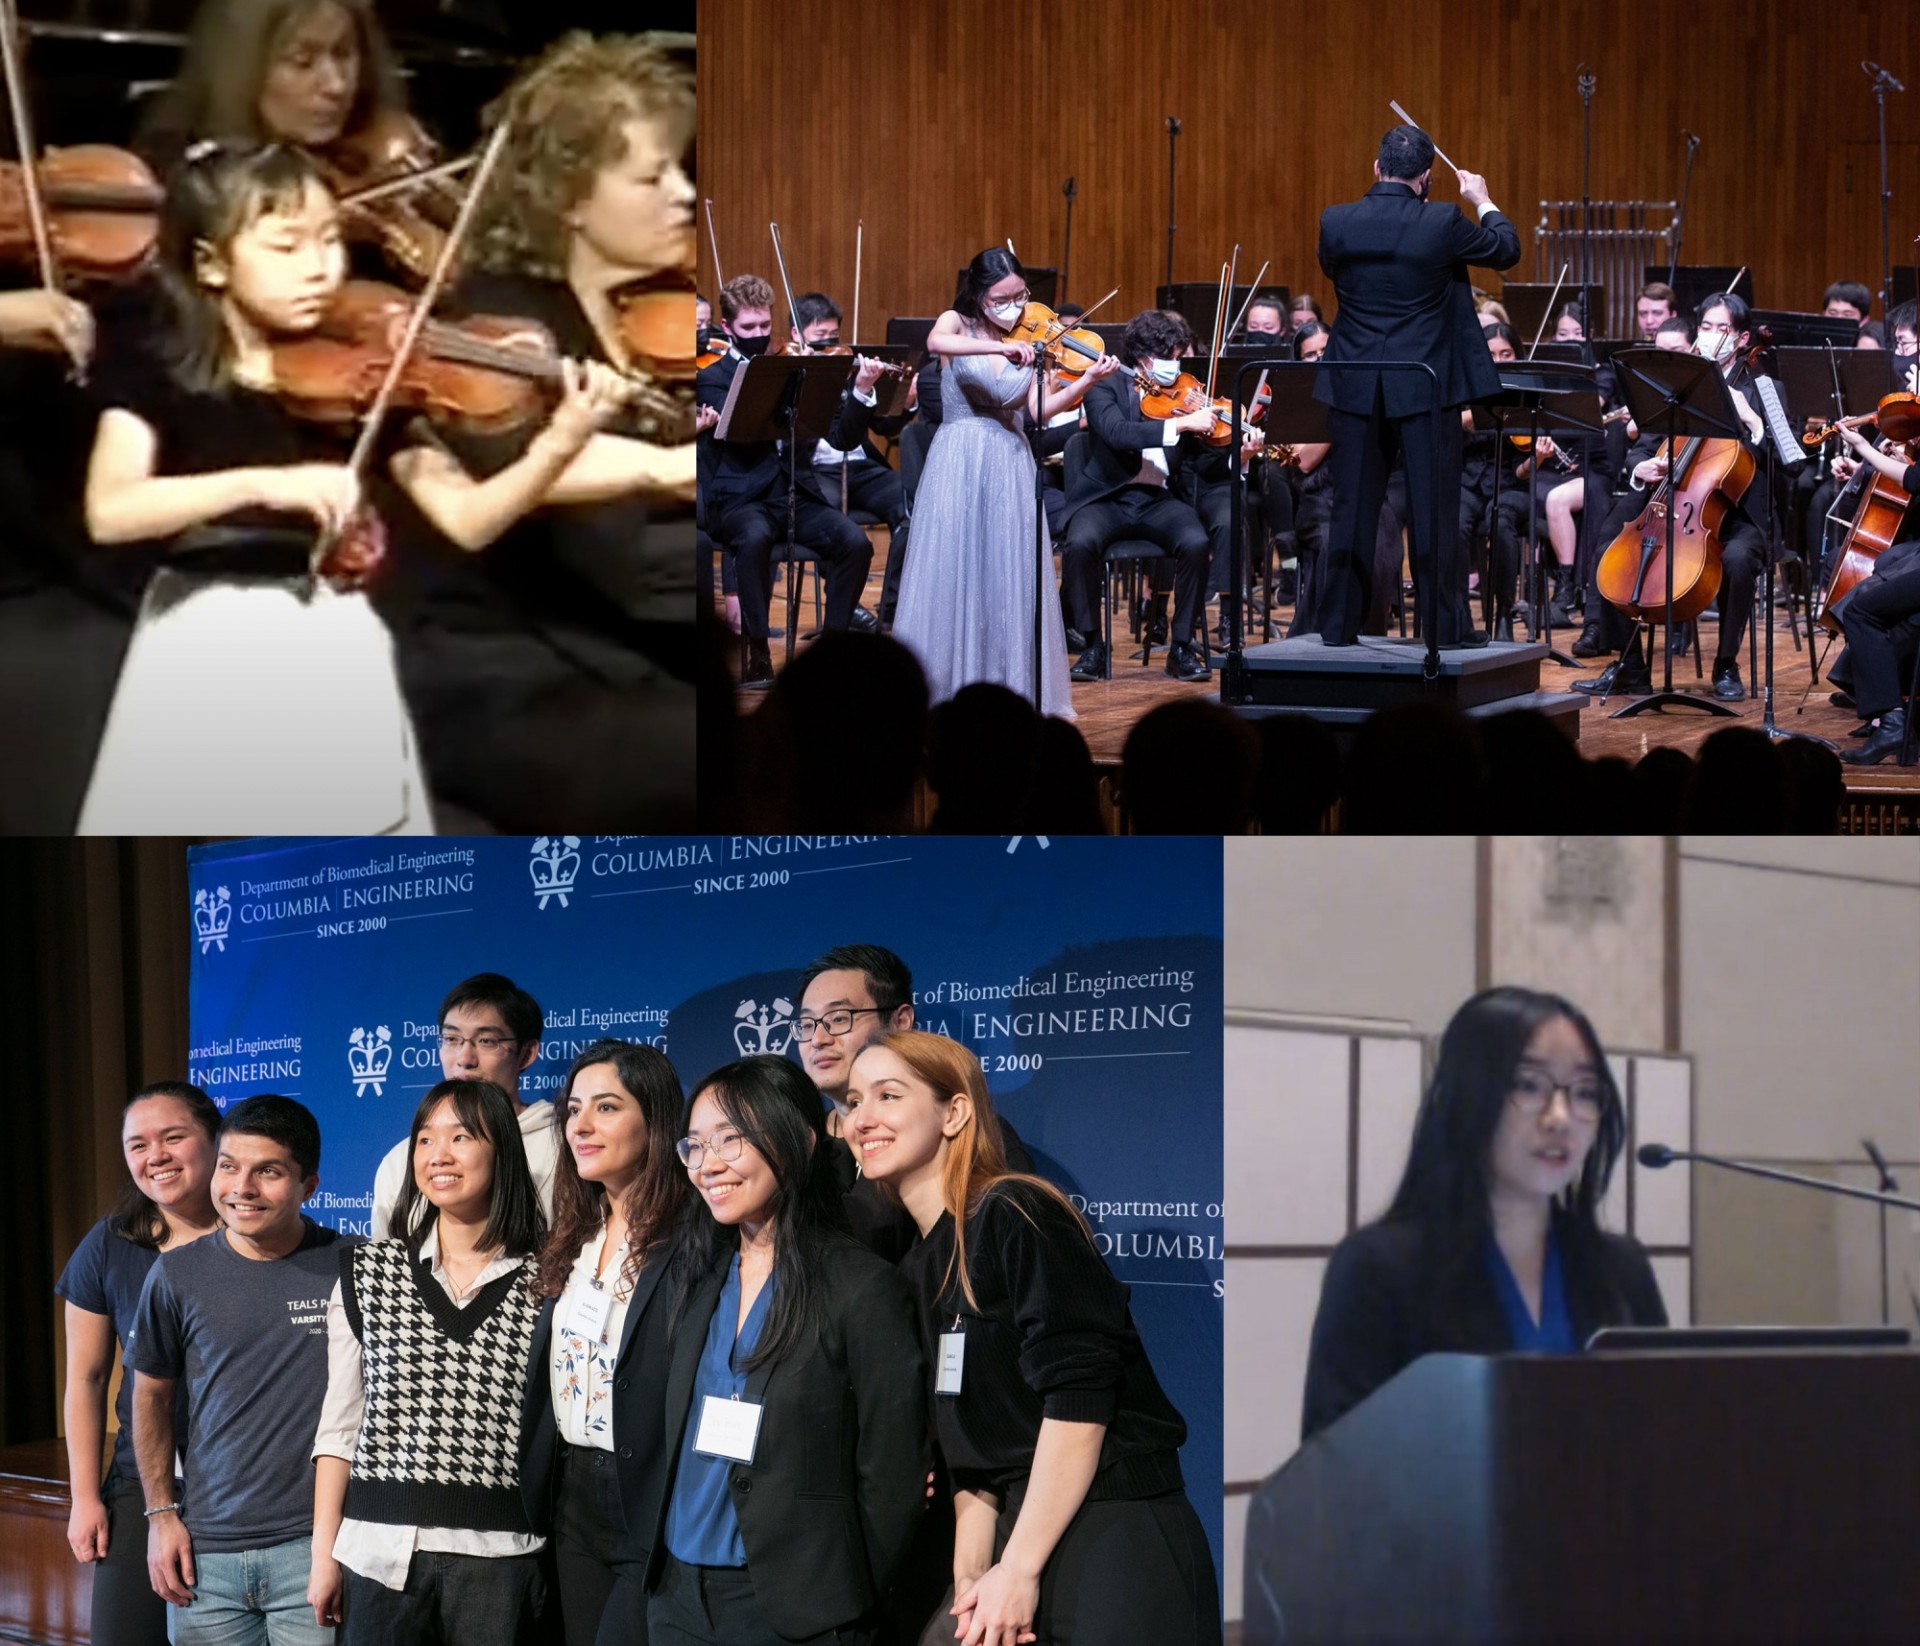 Clockwise from left: first ever solo experience, Vivaldi violin concerto in December 2007; soloing Sarasate's Carmen Fantasy with the MIT Symphony Orchestra in March 2022; talk at the International Society for Computational Biology in November 2022; the Azizi lab family.